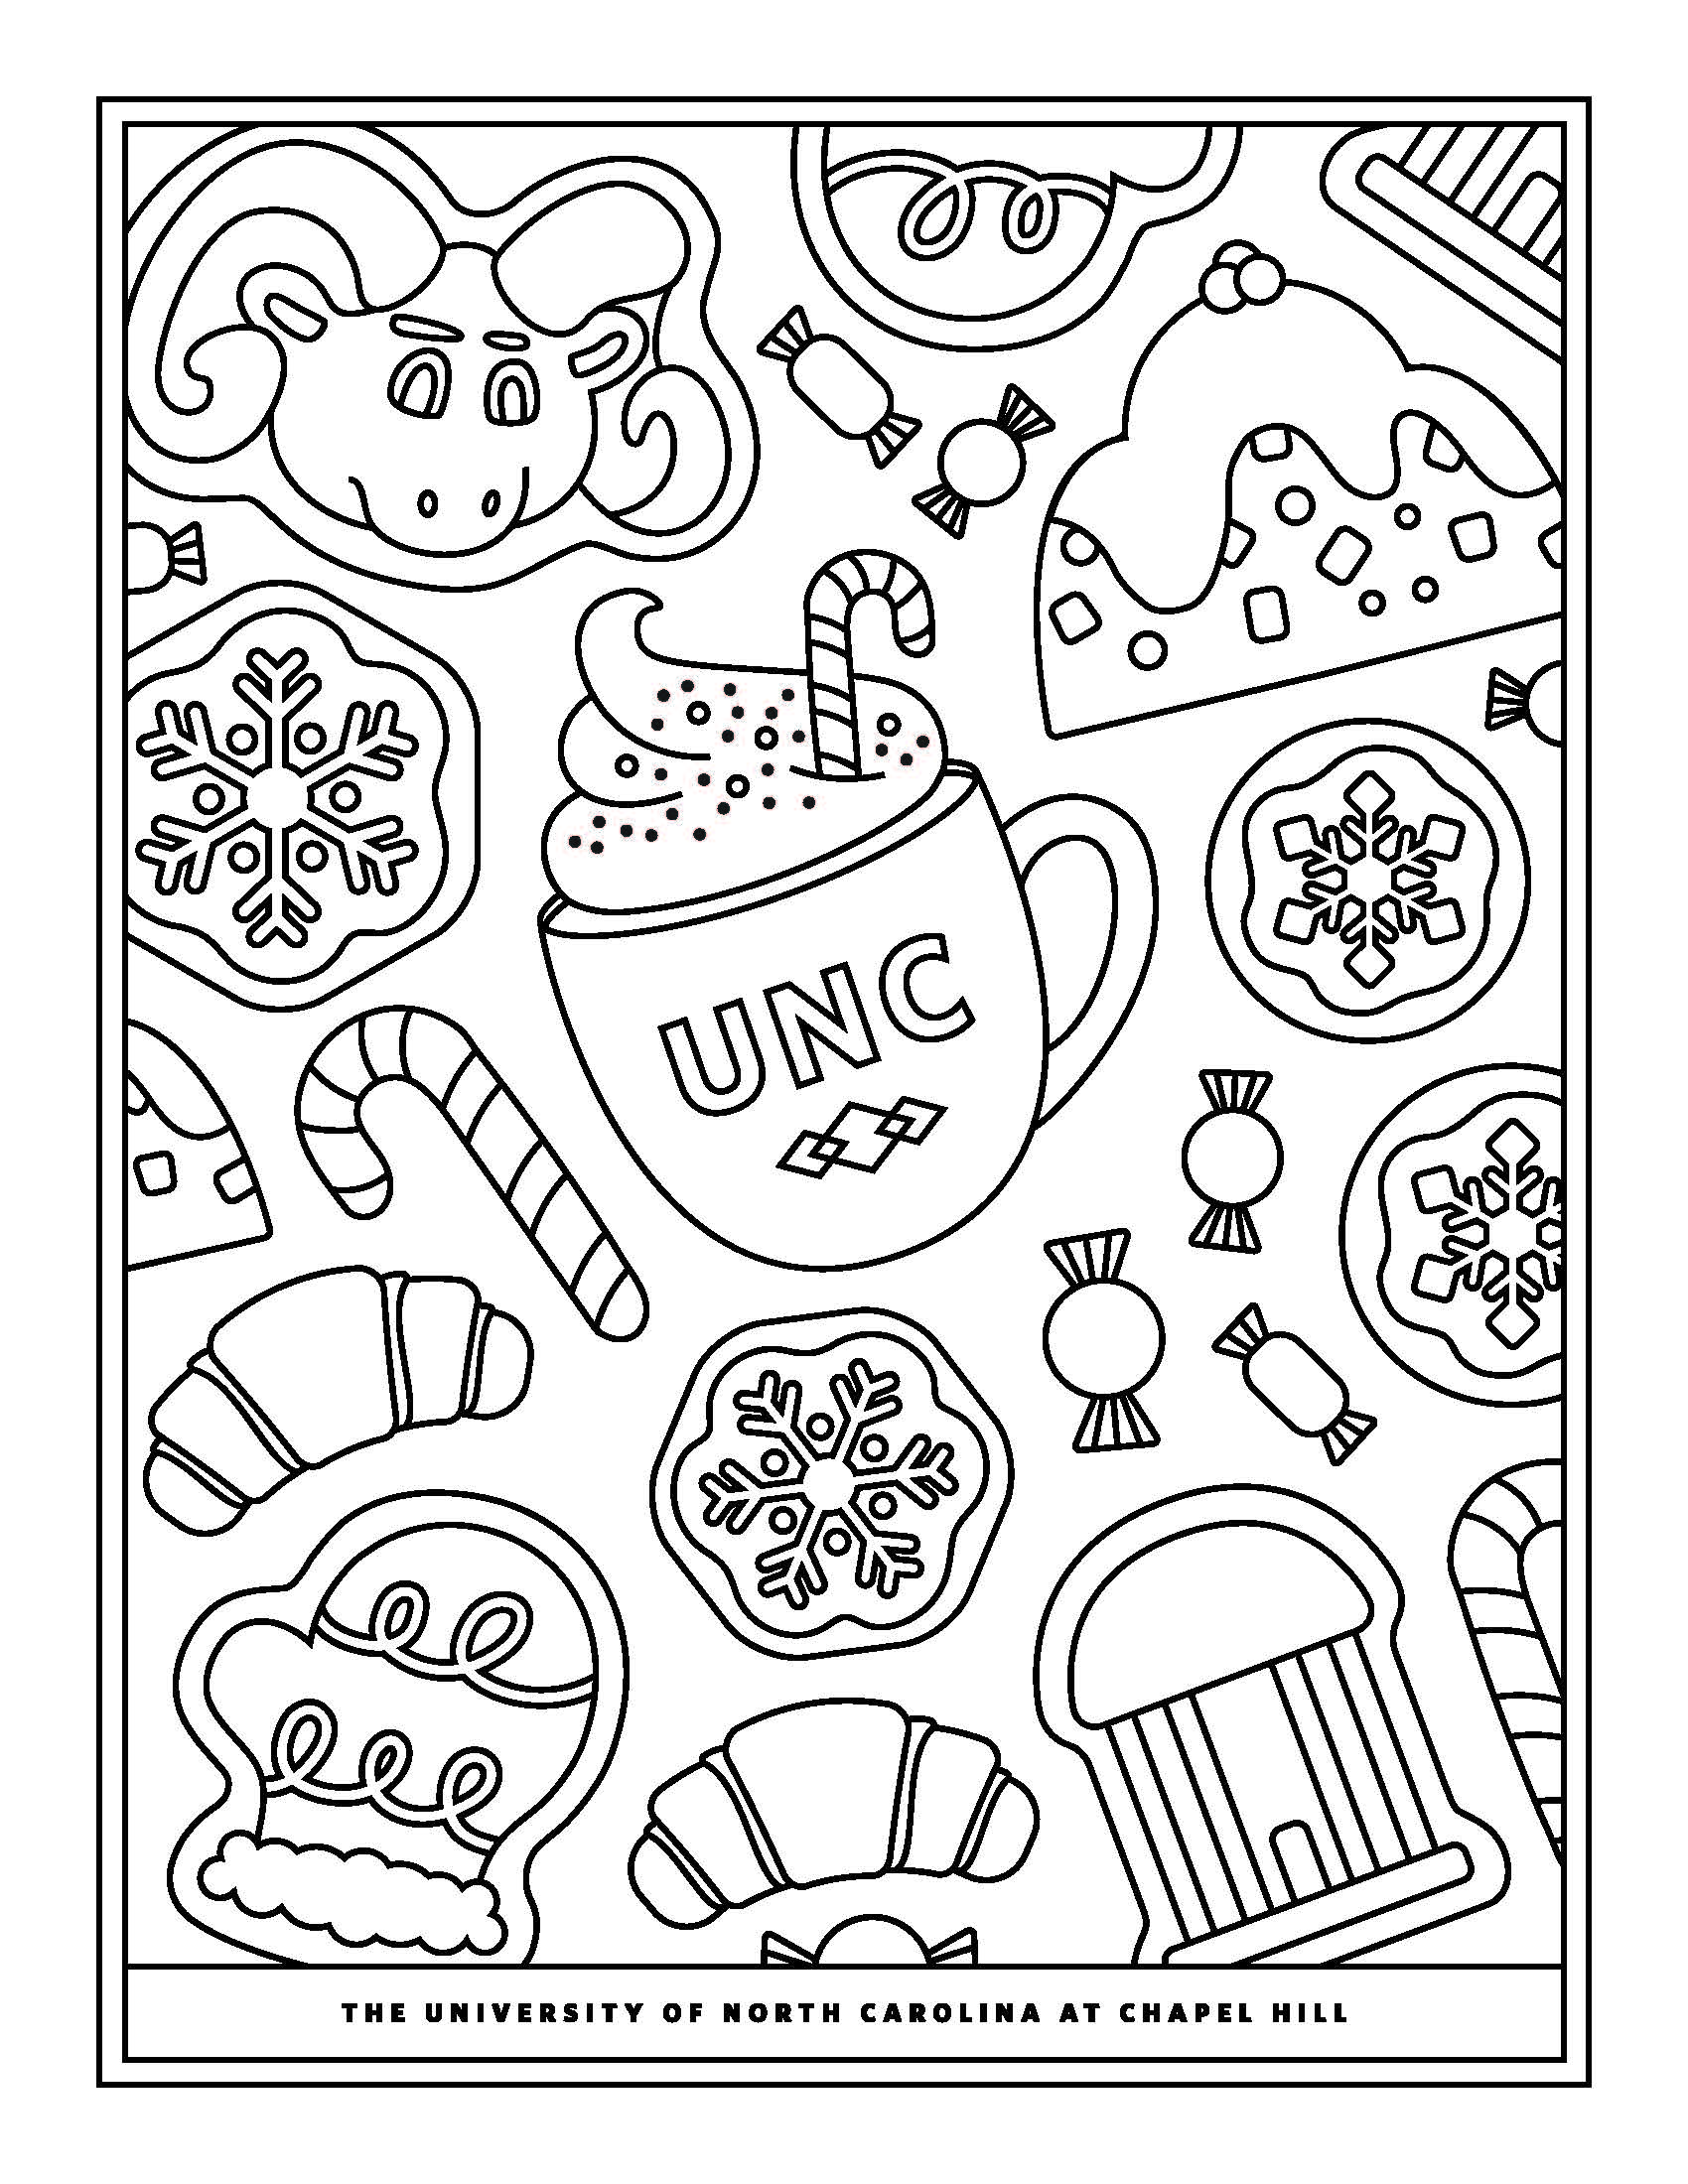 A coloring page of holiday drawings including hot cocoa, snowflakes and mittens